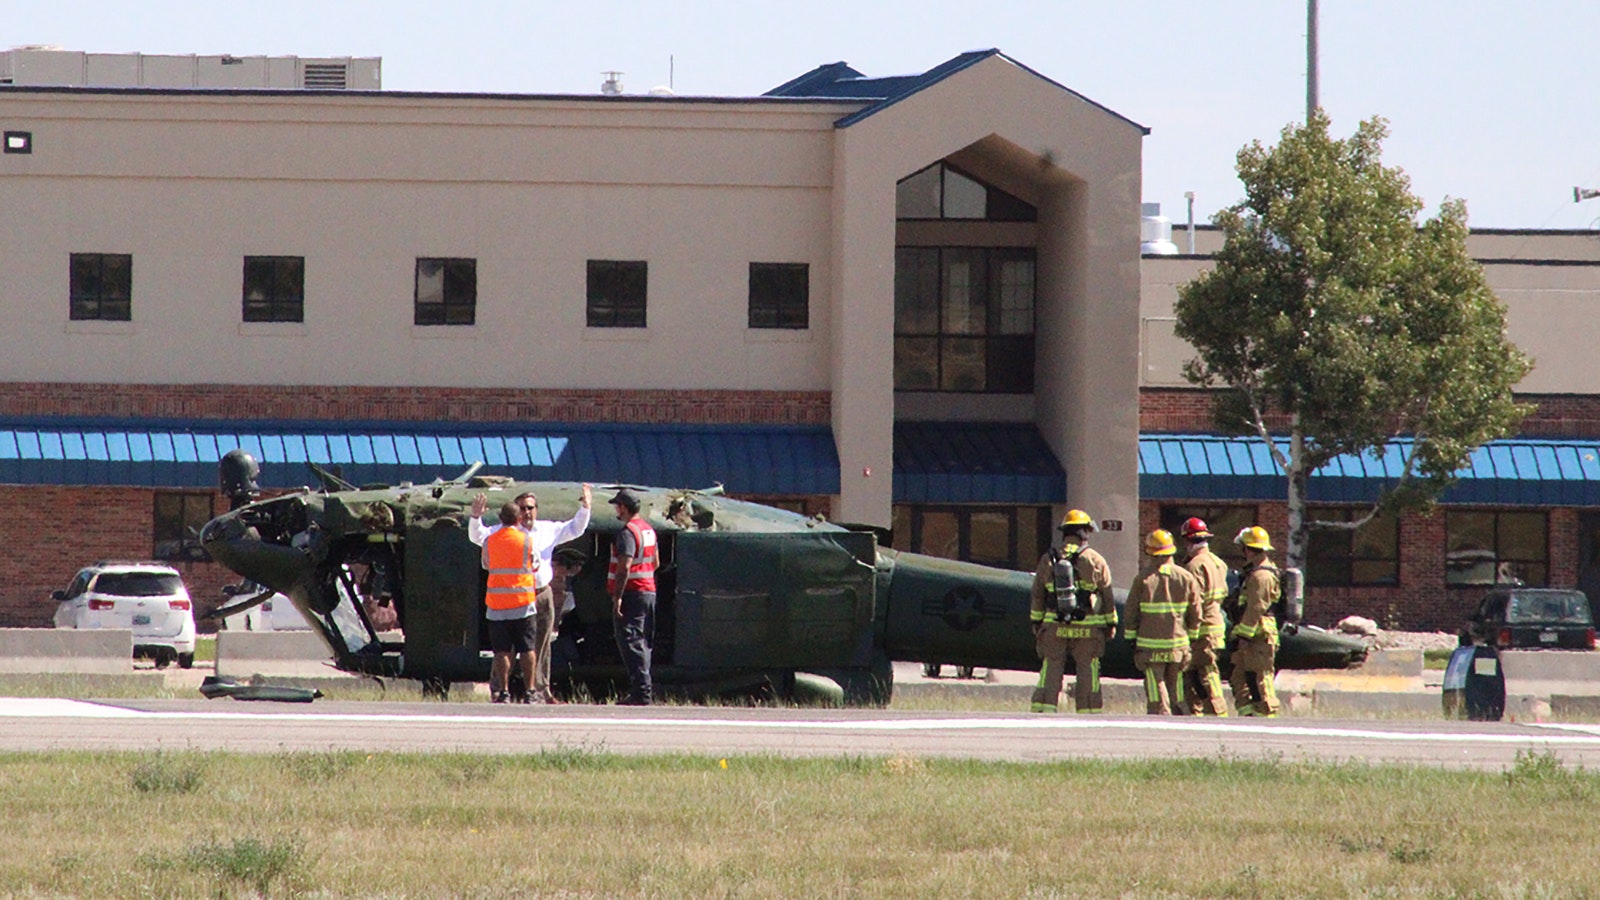 A UH-1 helicopter from F.E. Warren Air Force Base flipped and crashed at the Cheyenne Regional Airport on Wednesday morning. A witness told Cowboy State Daily he watched those on board get out and it doesn't appear anyone was seriously hurt.